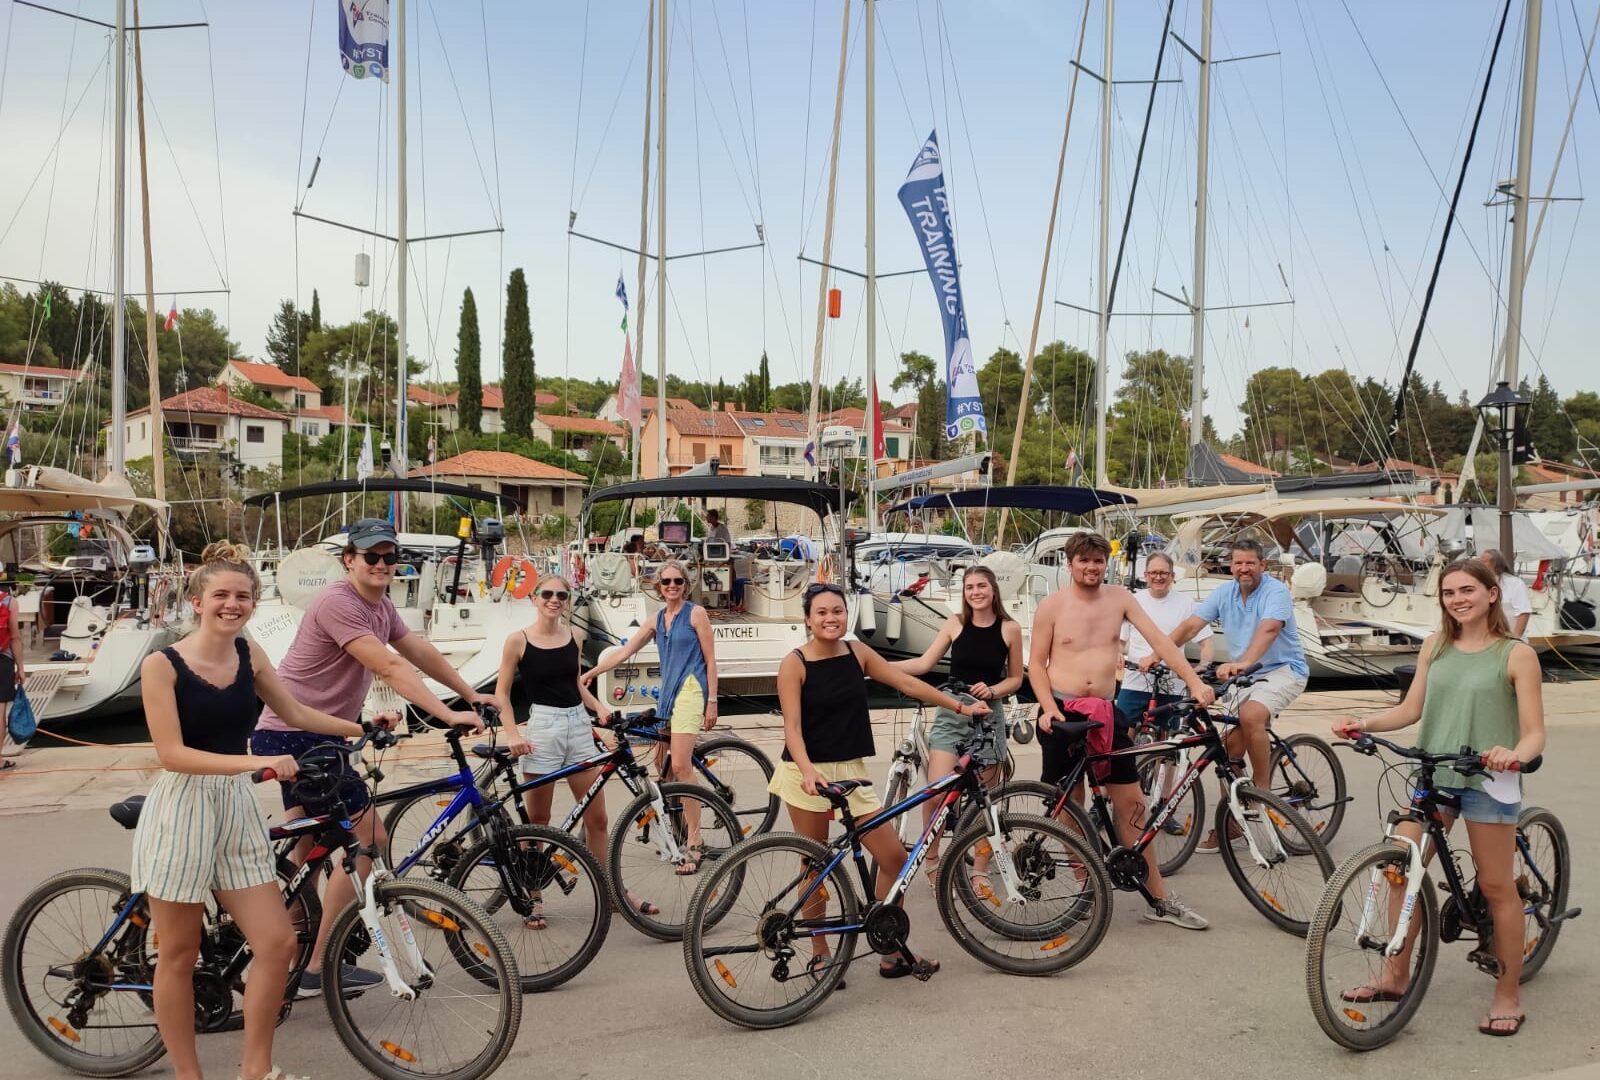 A realistic image of people on bicycles in a marina.